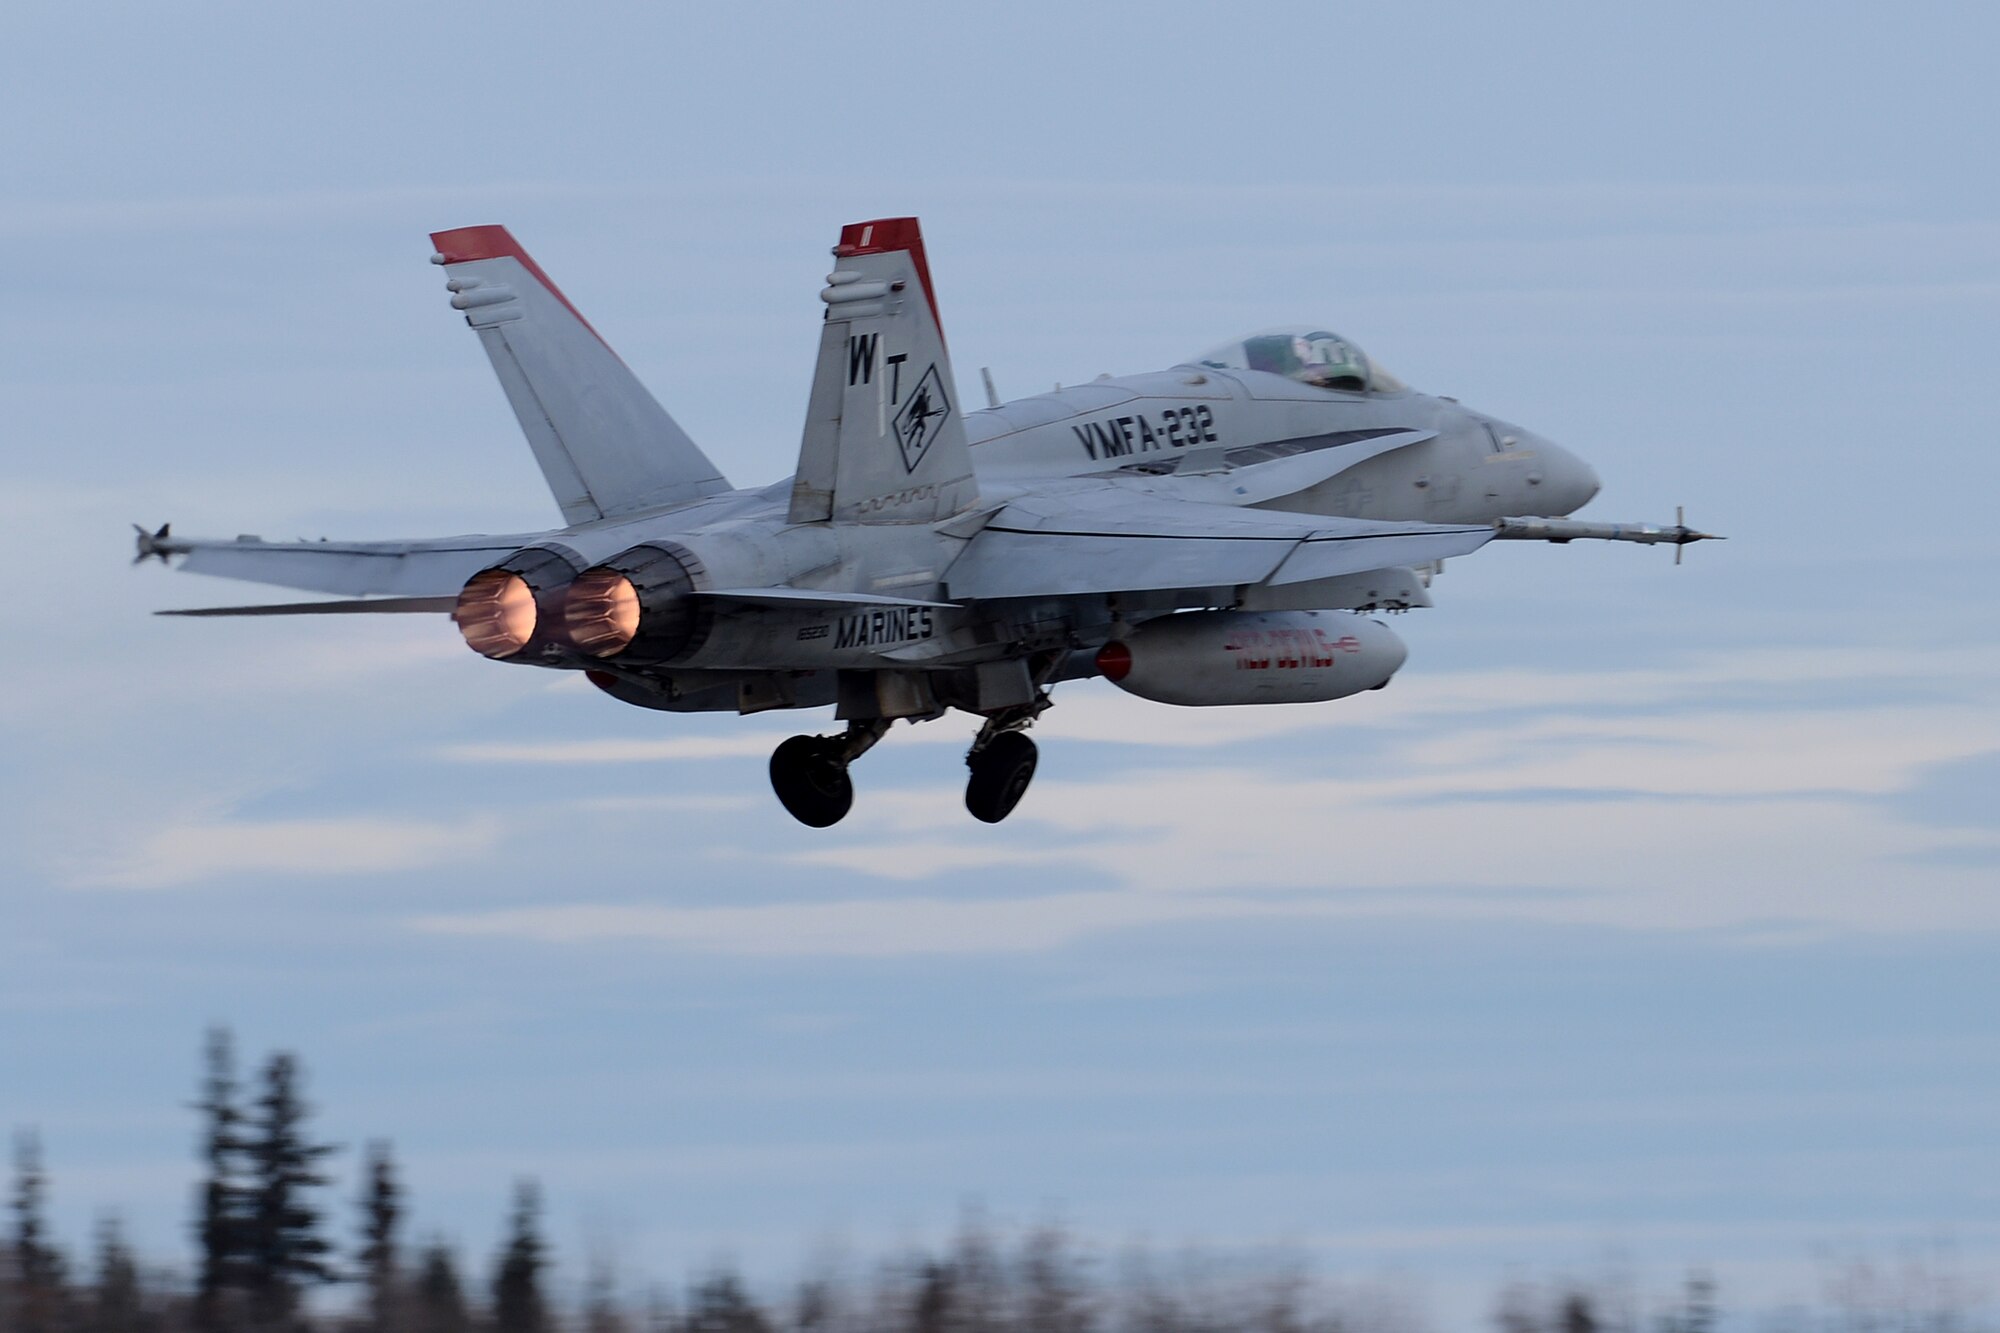 A U.S. Marine Corps F/A-18C Hornet aircraft from Marine Fighter Attack Squadron 232 out of Marine Corps Air Station Miramar, Calif., takes off from Eielson Air Force Base, Alaska, Oct. 10, 2016, for the first RED FLAG-Alaska (RF-A) 17-1 combat training mission. This exercise provides unique opportunities to integrate various forces into joint, coalition and multilateral training from simulated forward operating bases. (U.S. Air Force photo by Master Sgt. Karen J. Tomasik)